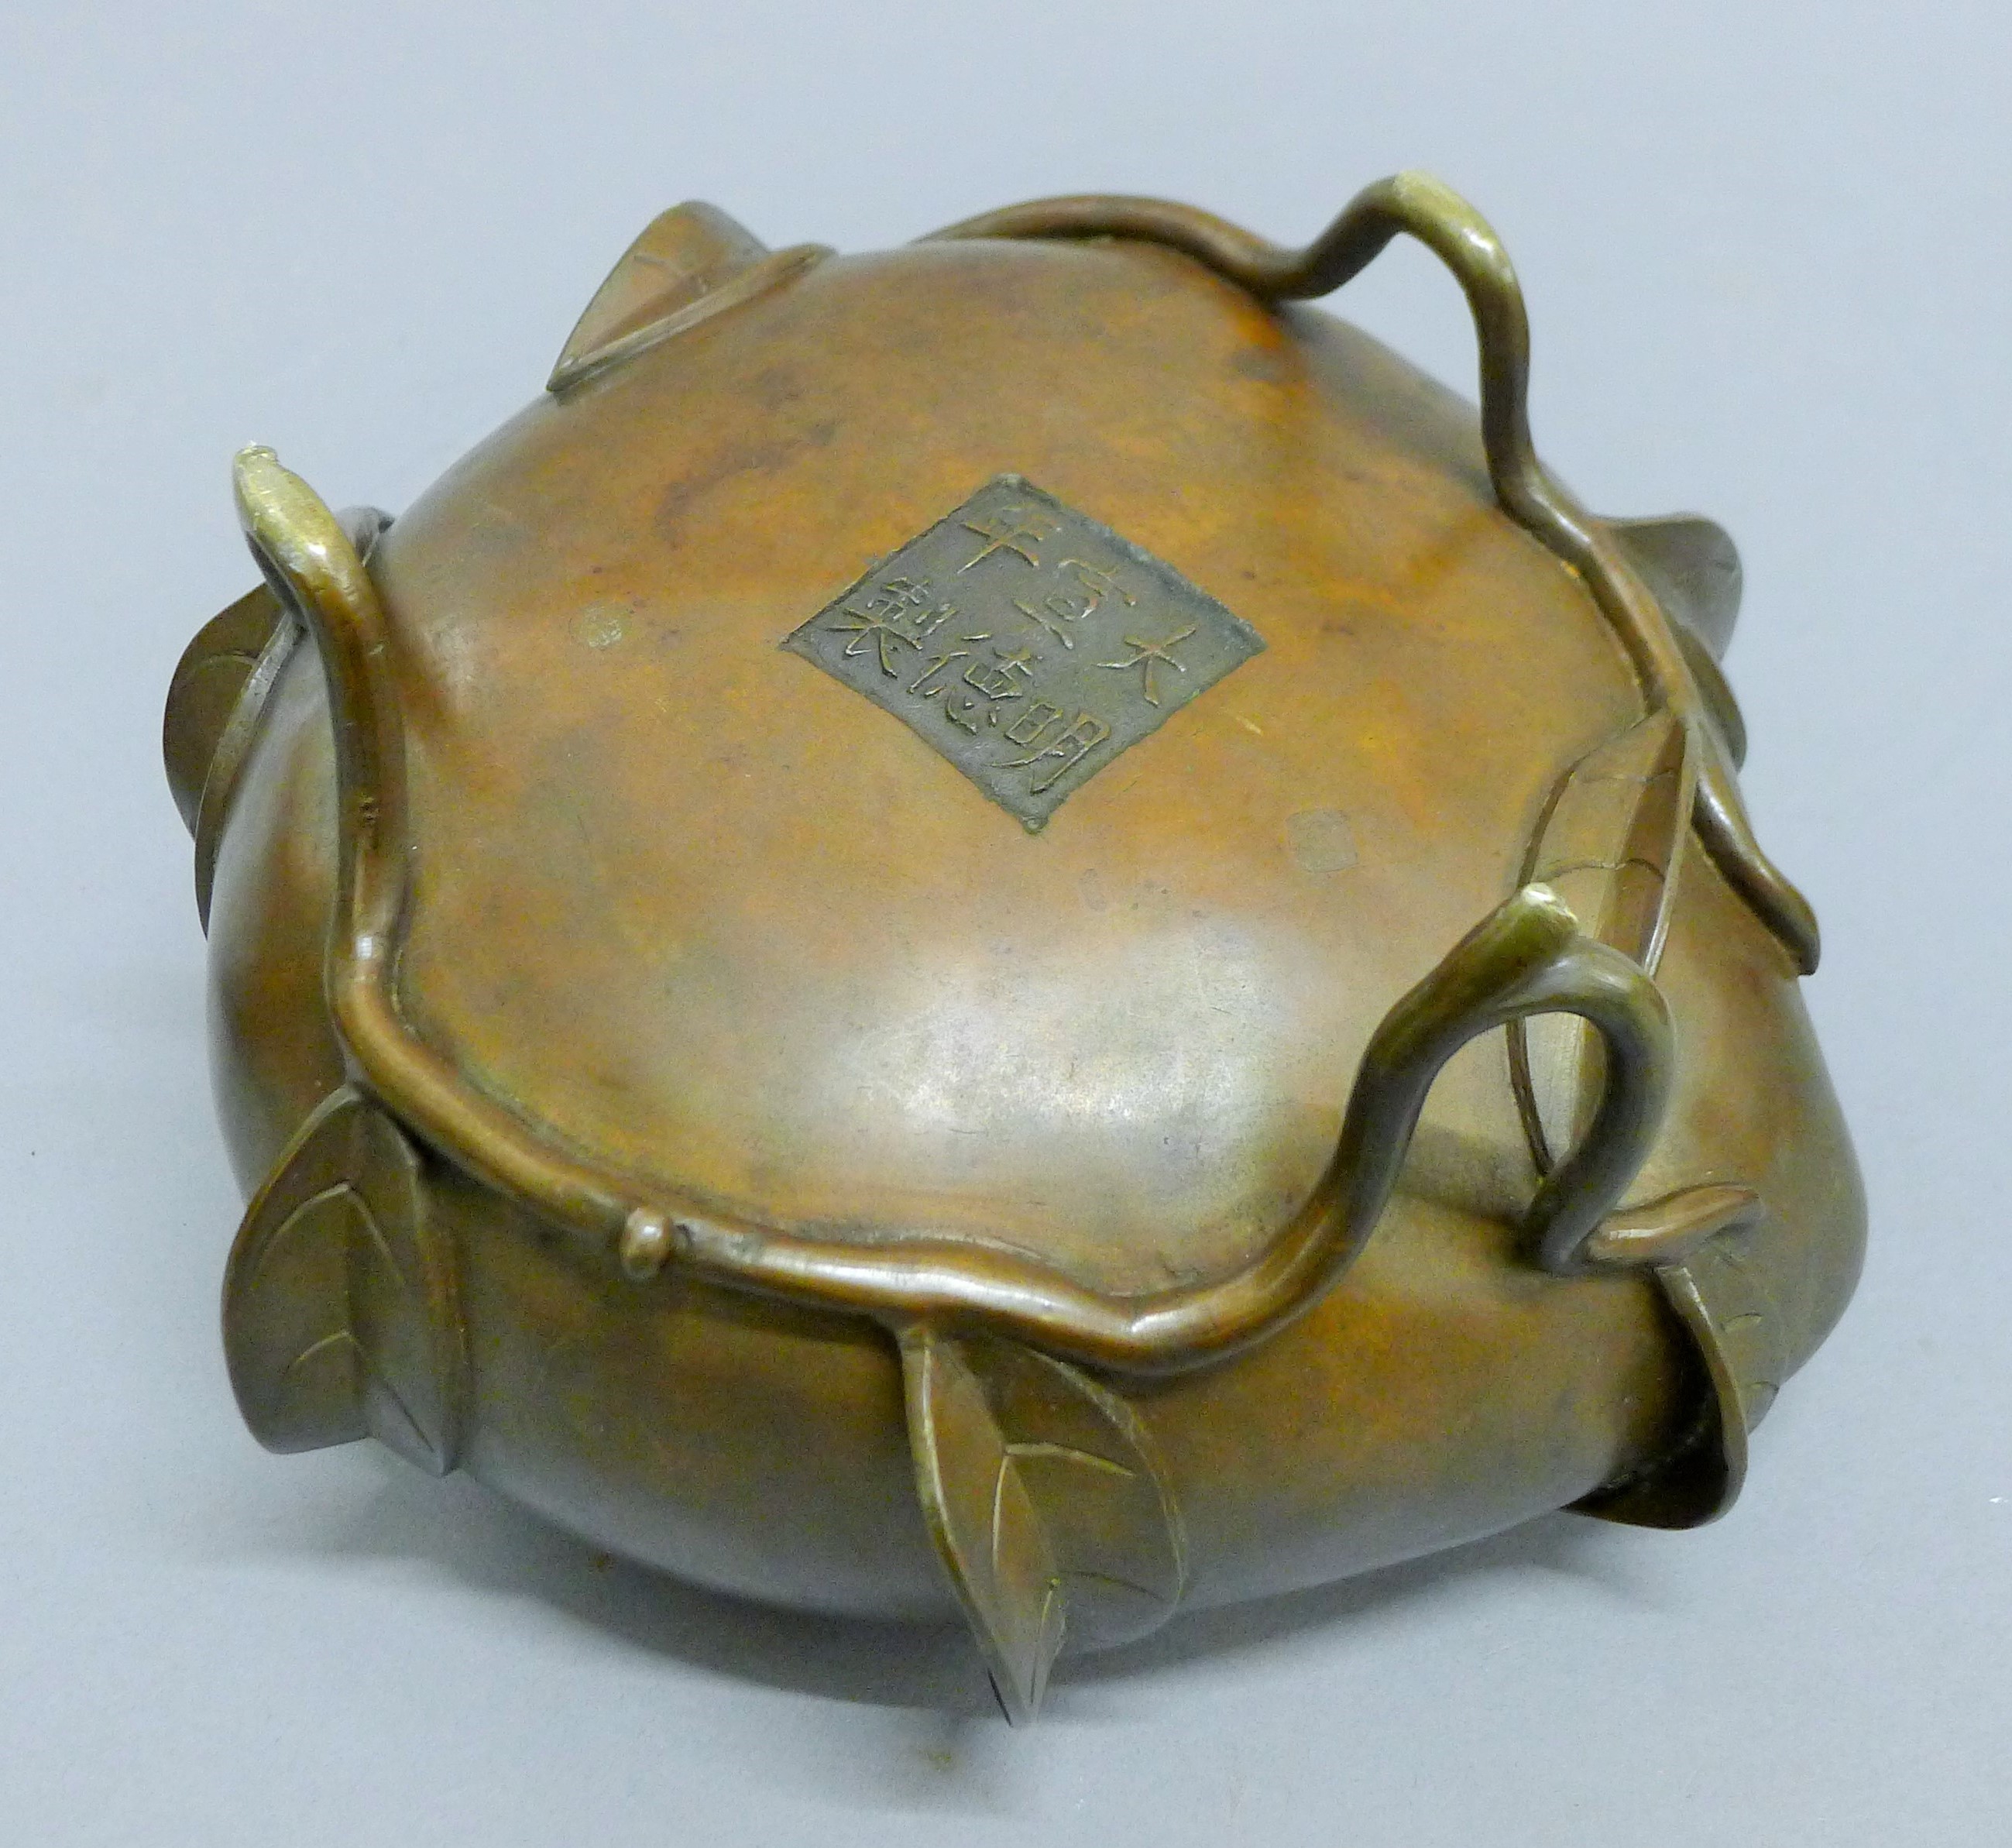 A 19th century Chinese bronze censer formed as a peach. 20 cm high. - Image 5 of 6